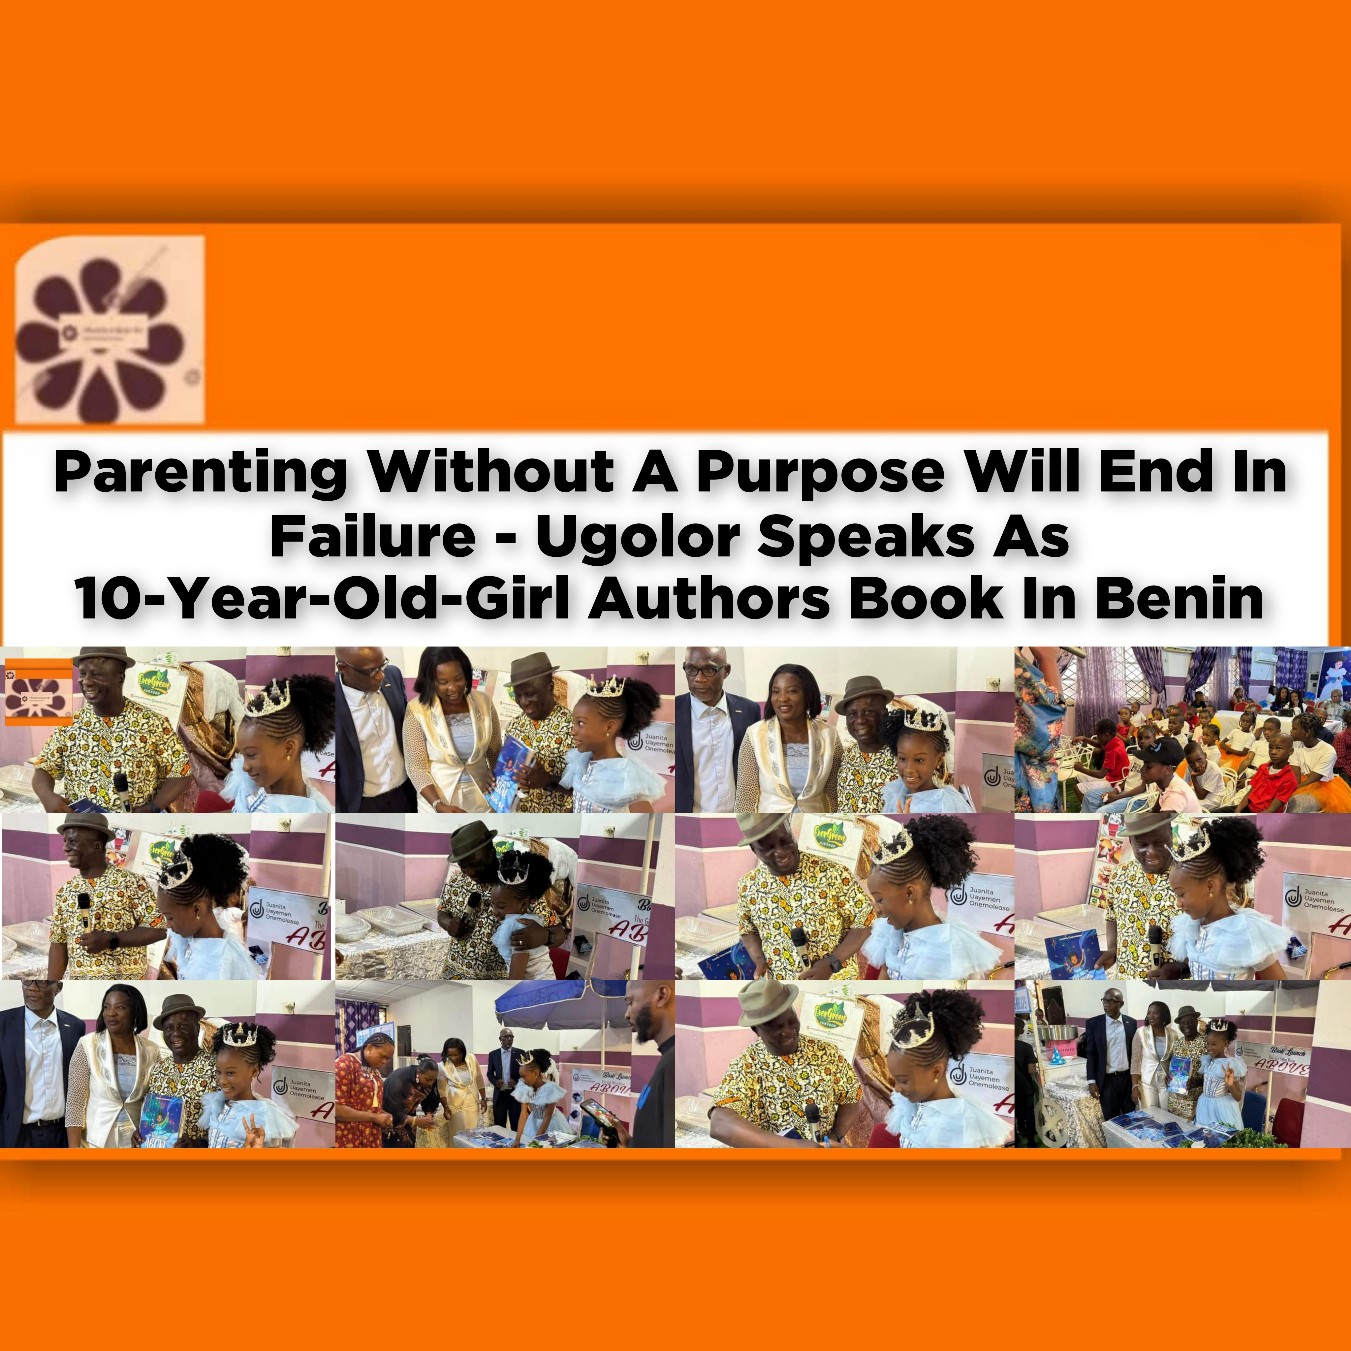 Parenting Without A Purpose Will End In Failure - Ugolor Speaks As 10-Year-Old-Girl Authors Book In Benin ~ OsazuwaAkonedo #Redesign